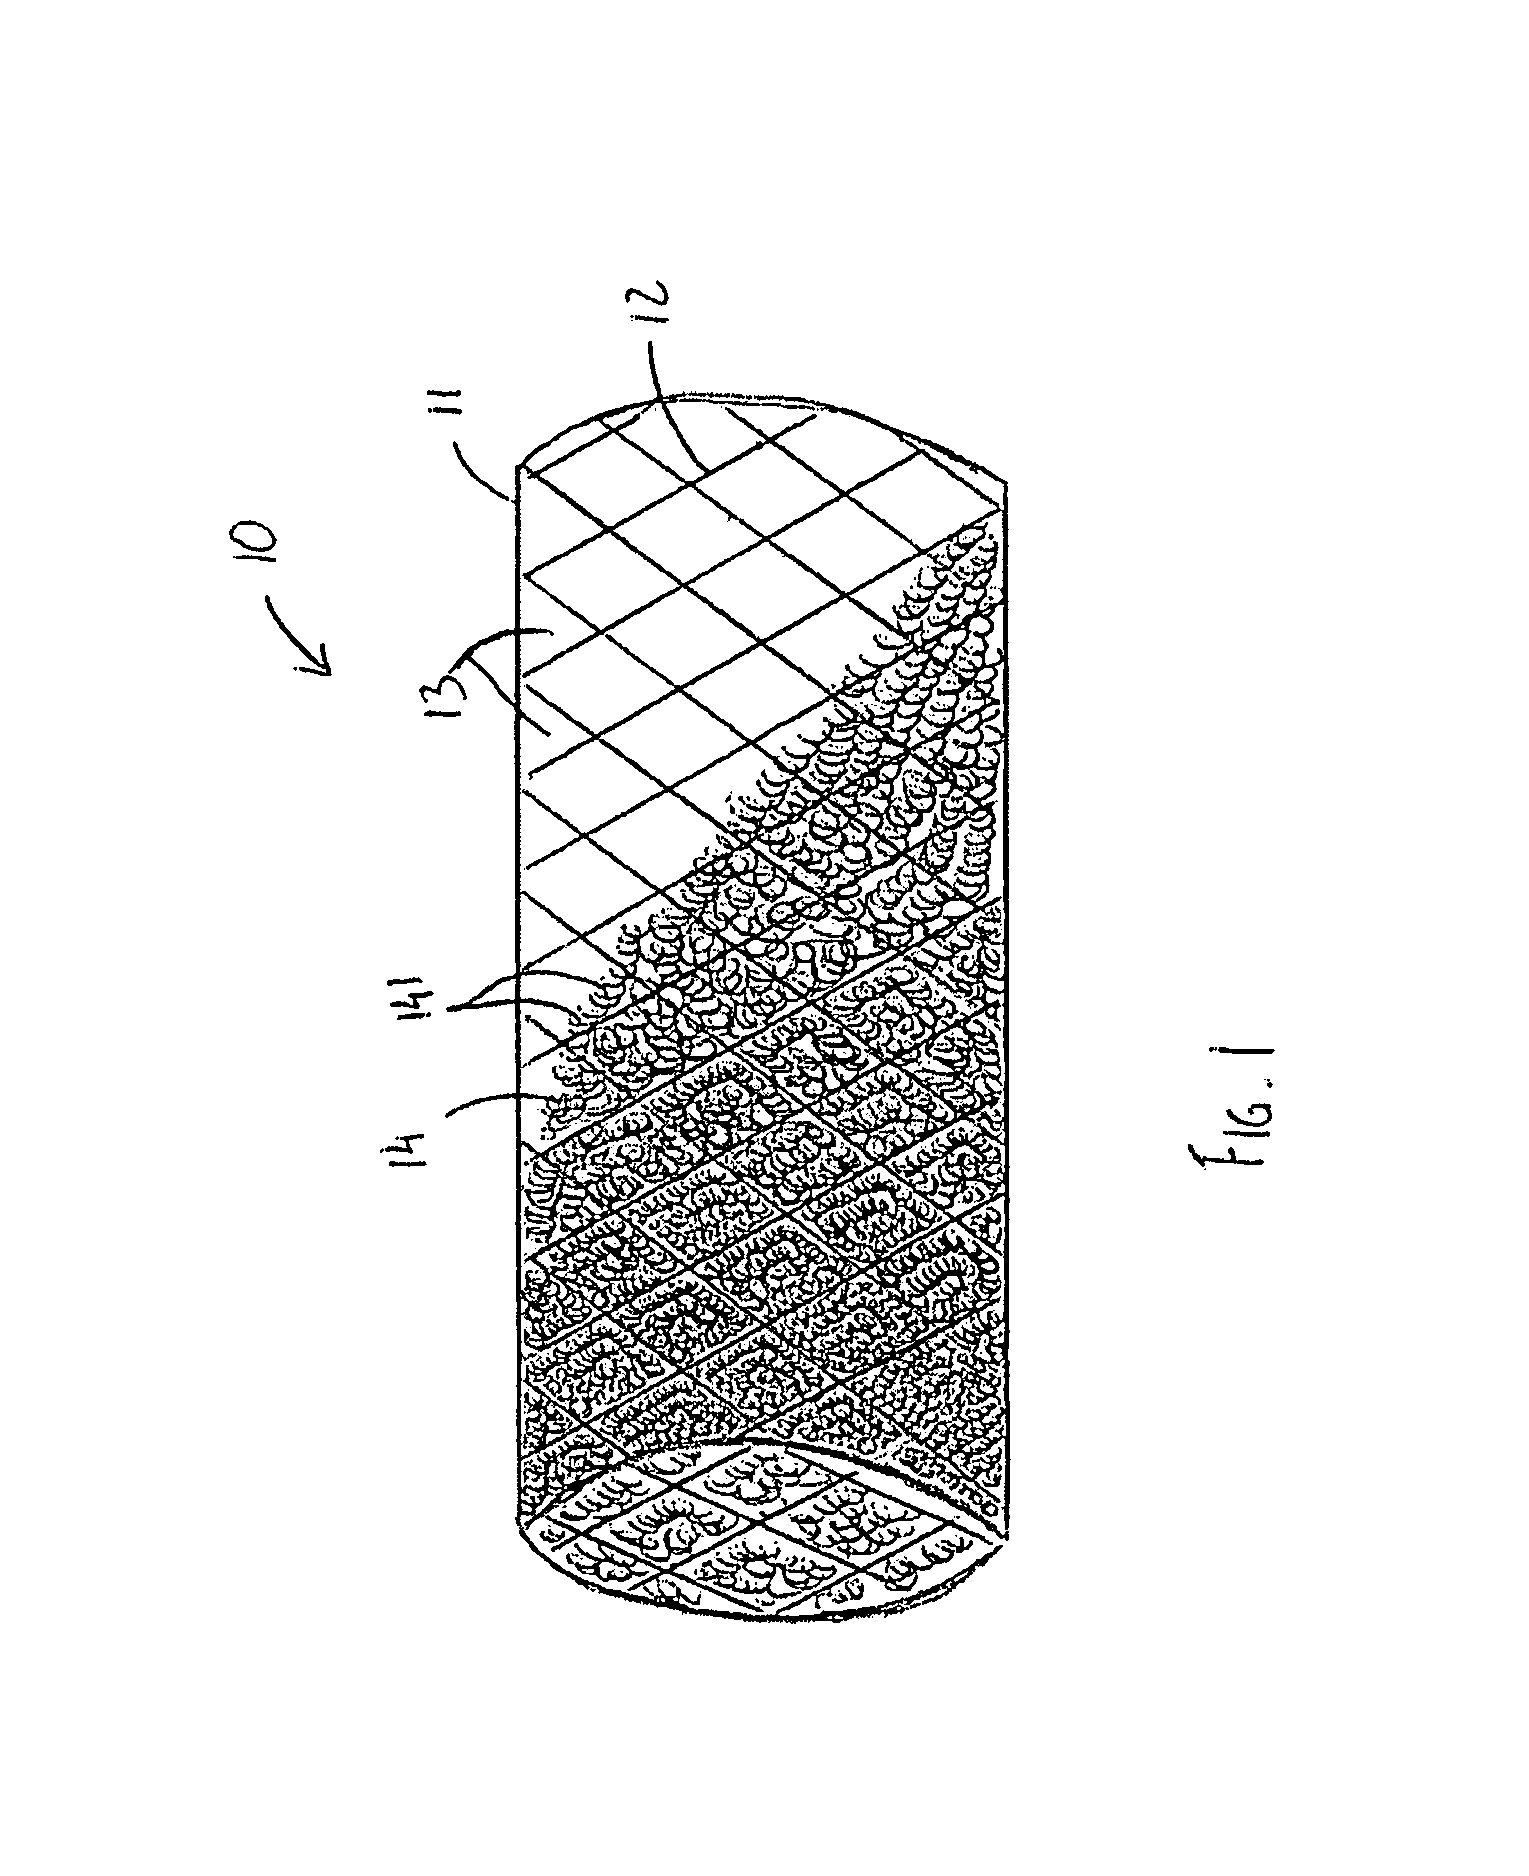 Intravascular device with netting system